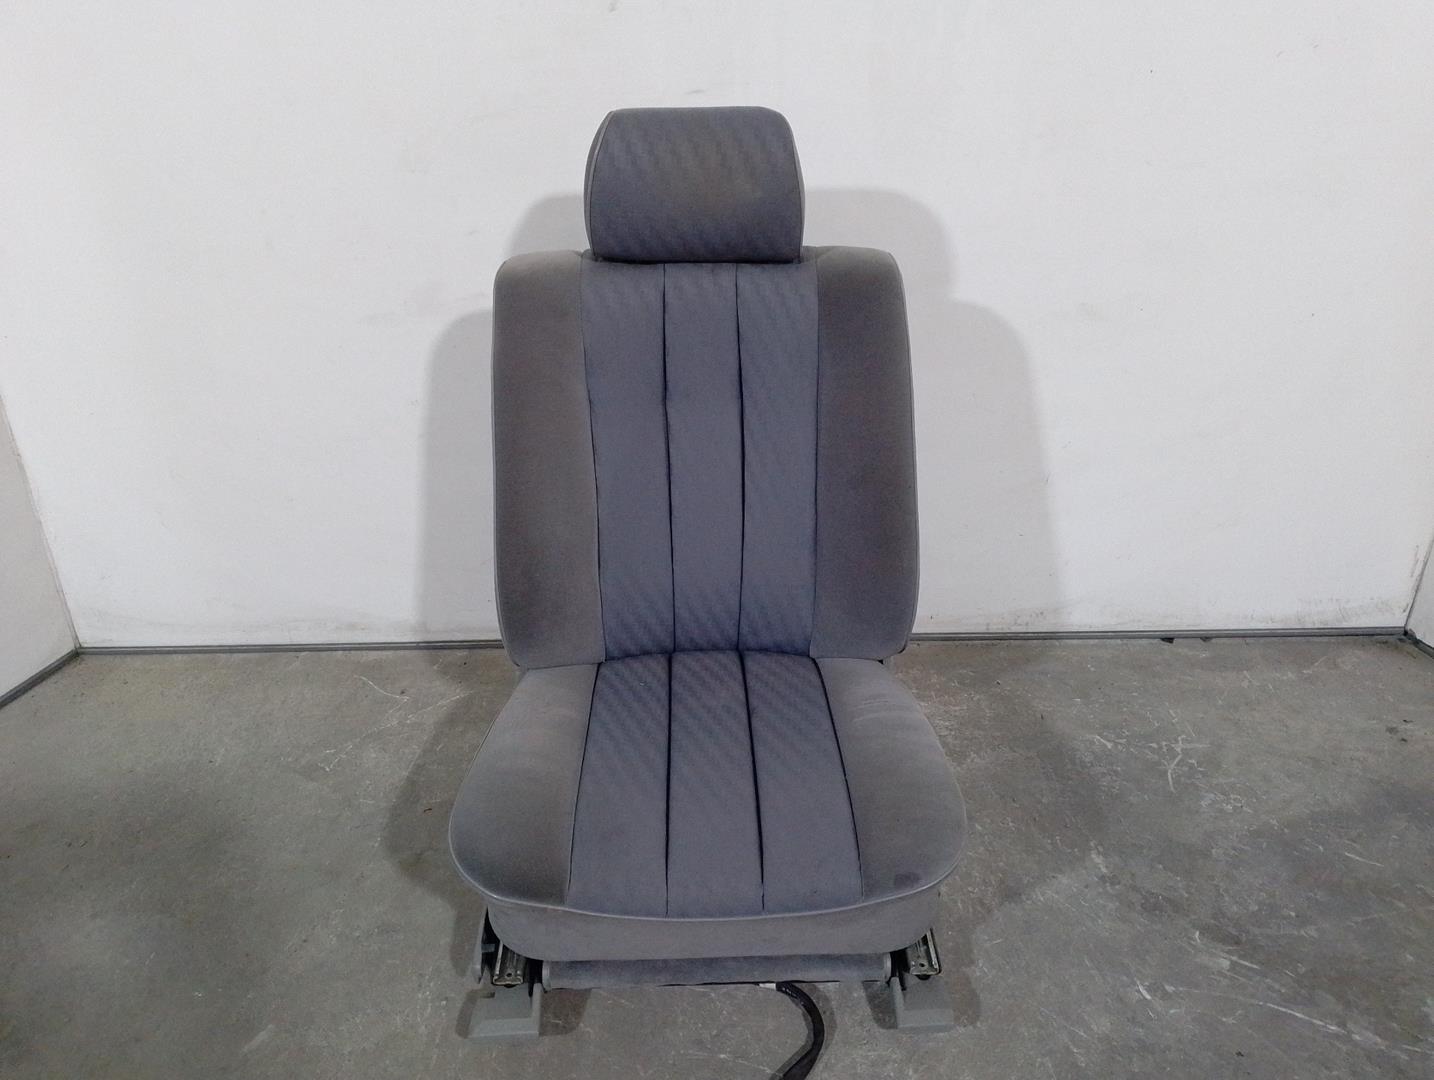 MERCEDES-BENZ S-Class W126 / C126 (1979-1991) Front Right Seat 4354973, TELAGRIS 24217156